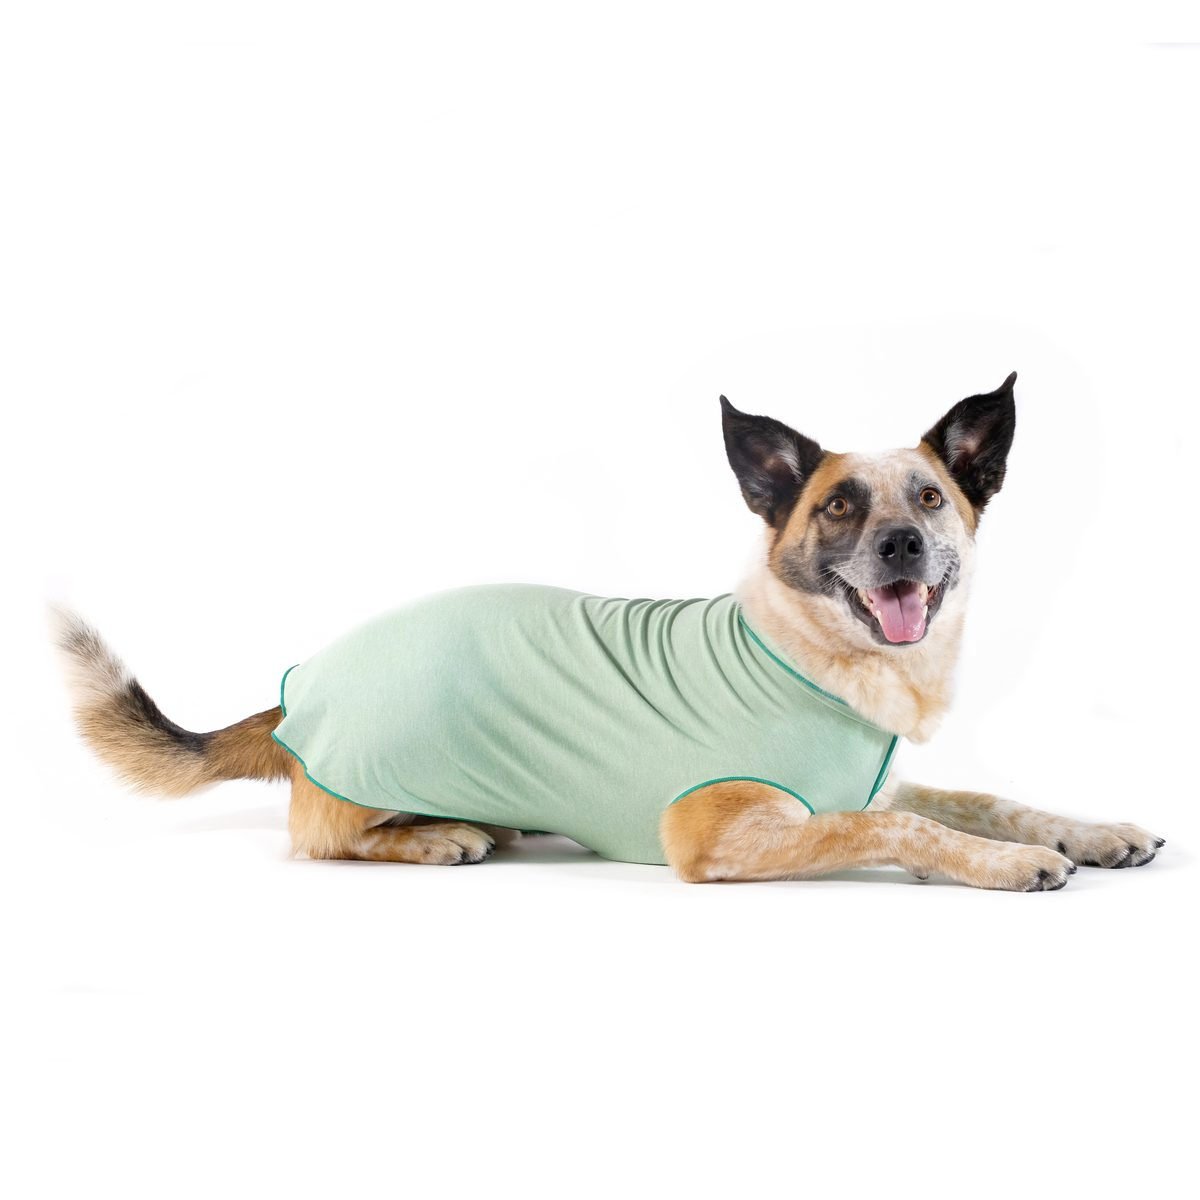 Sun Shield Tee shirts for Dogs and Cats, in Pistachio Heather